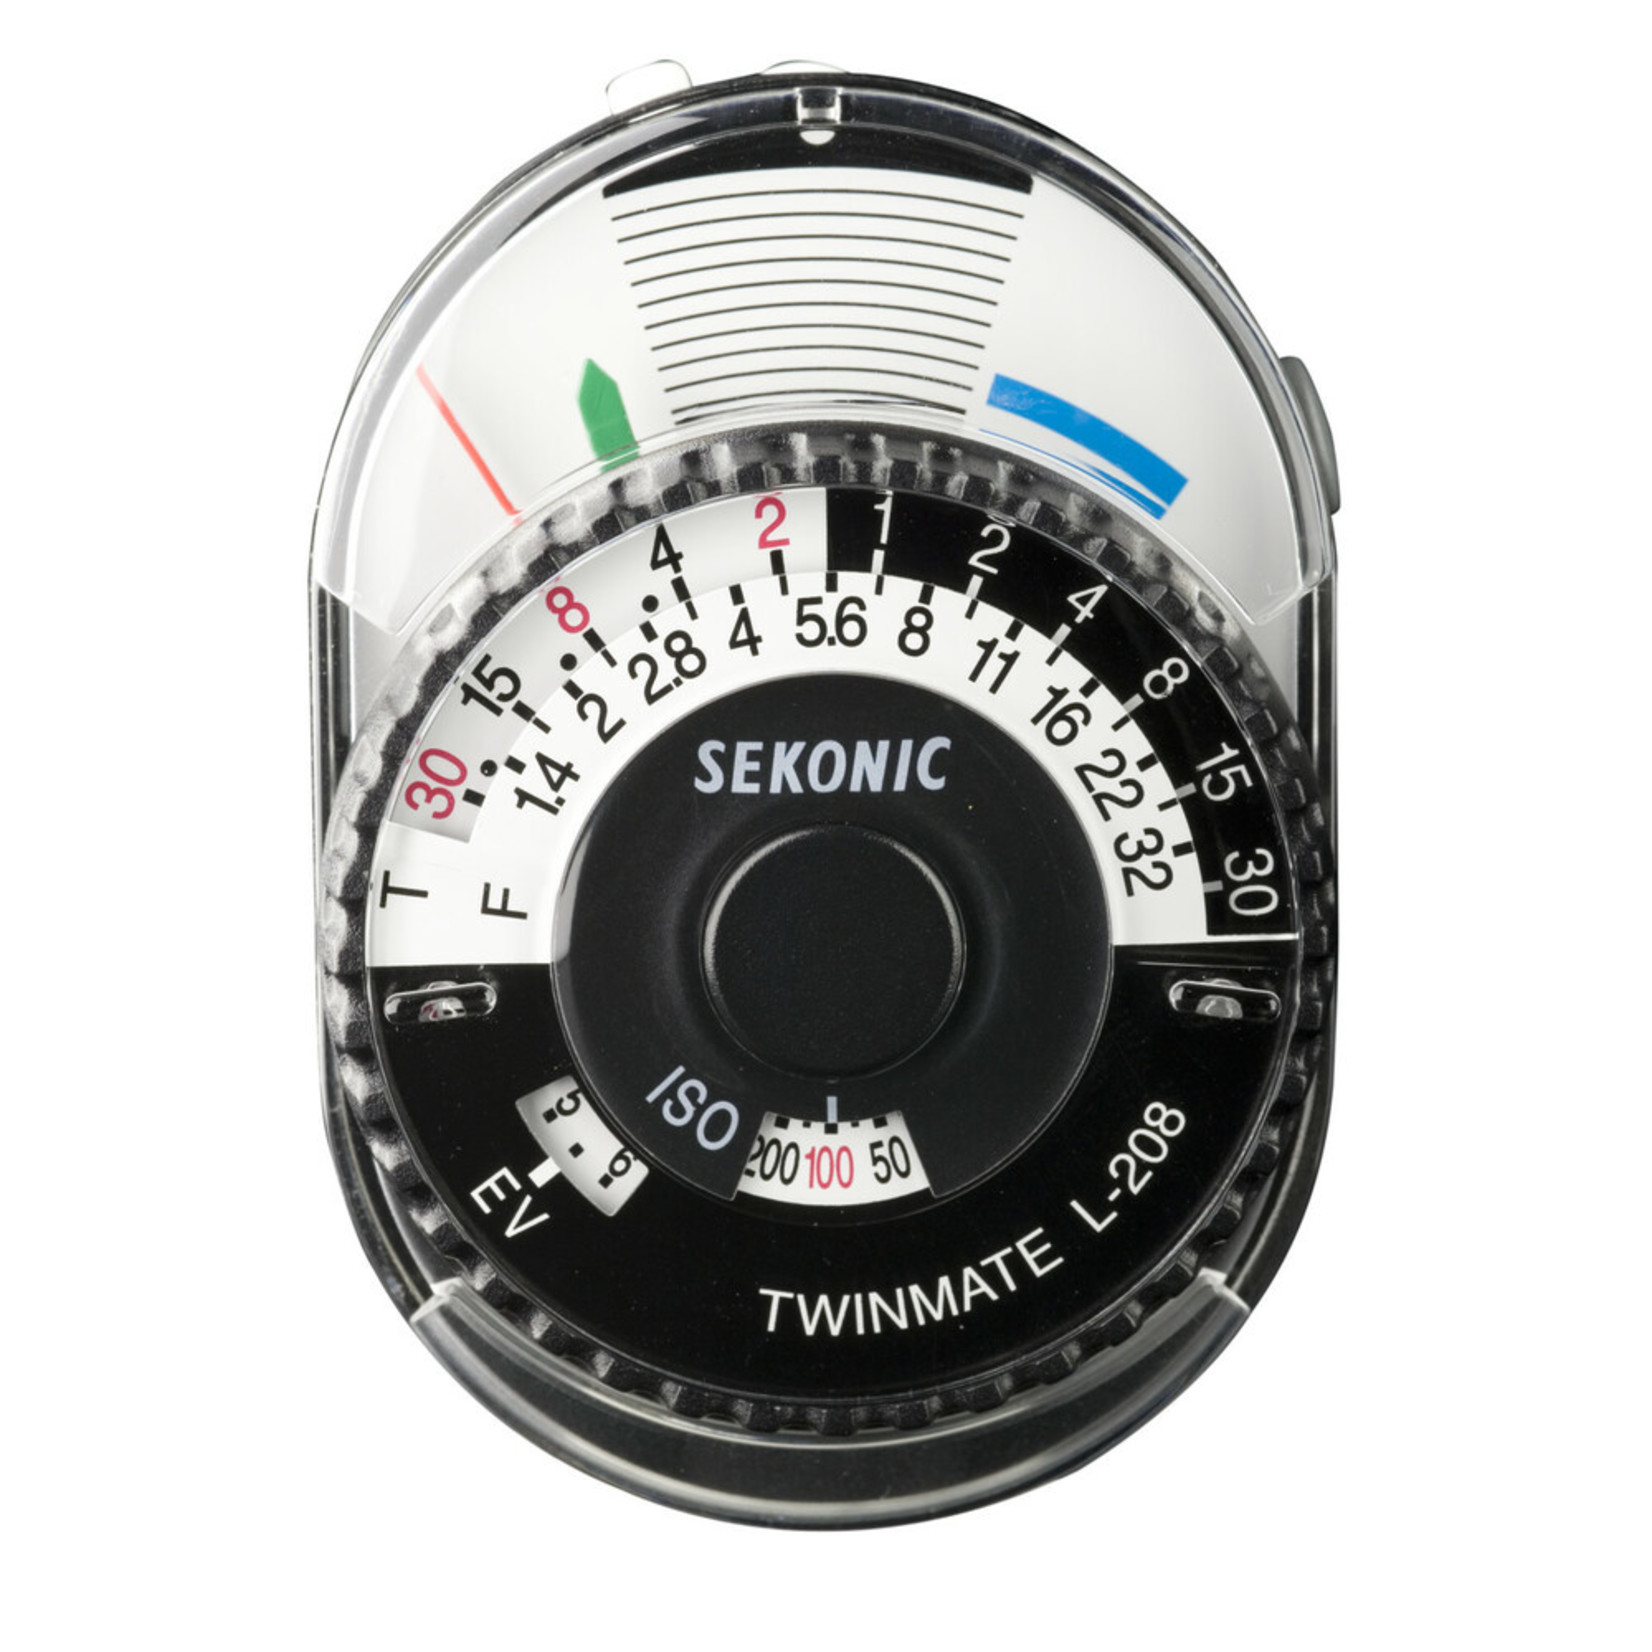 Sekonic Sekonic L-208 Twin Mate - Analog Incident and Reflected Light Meter